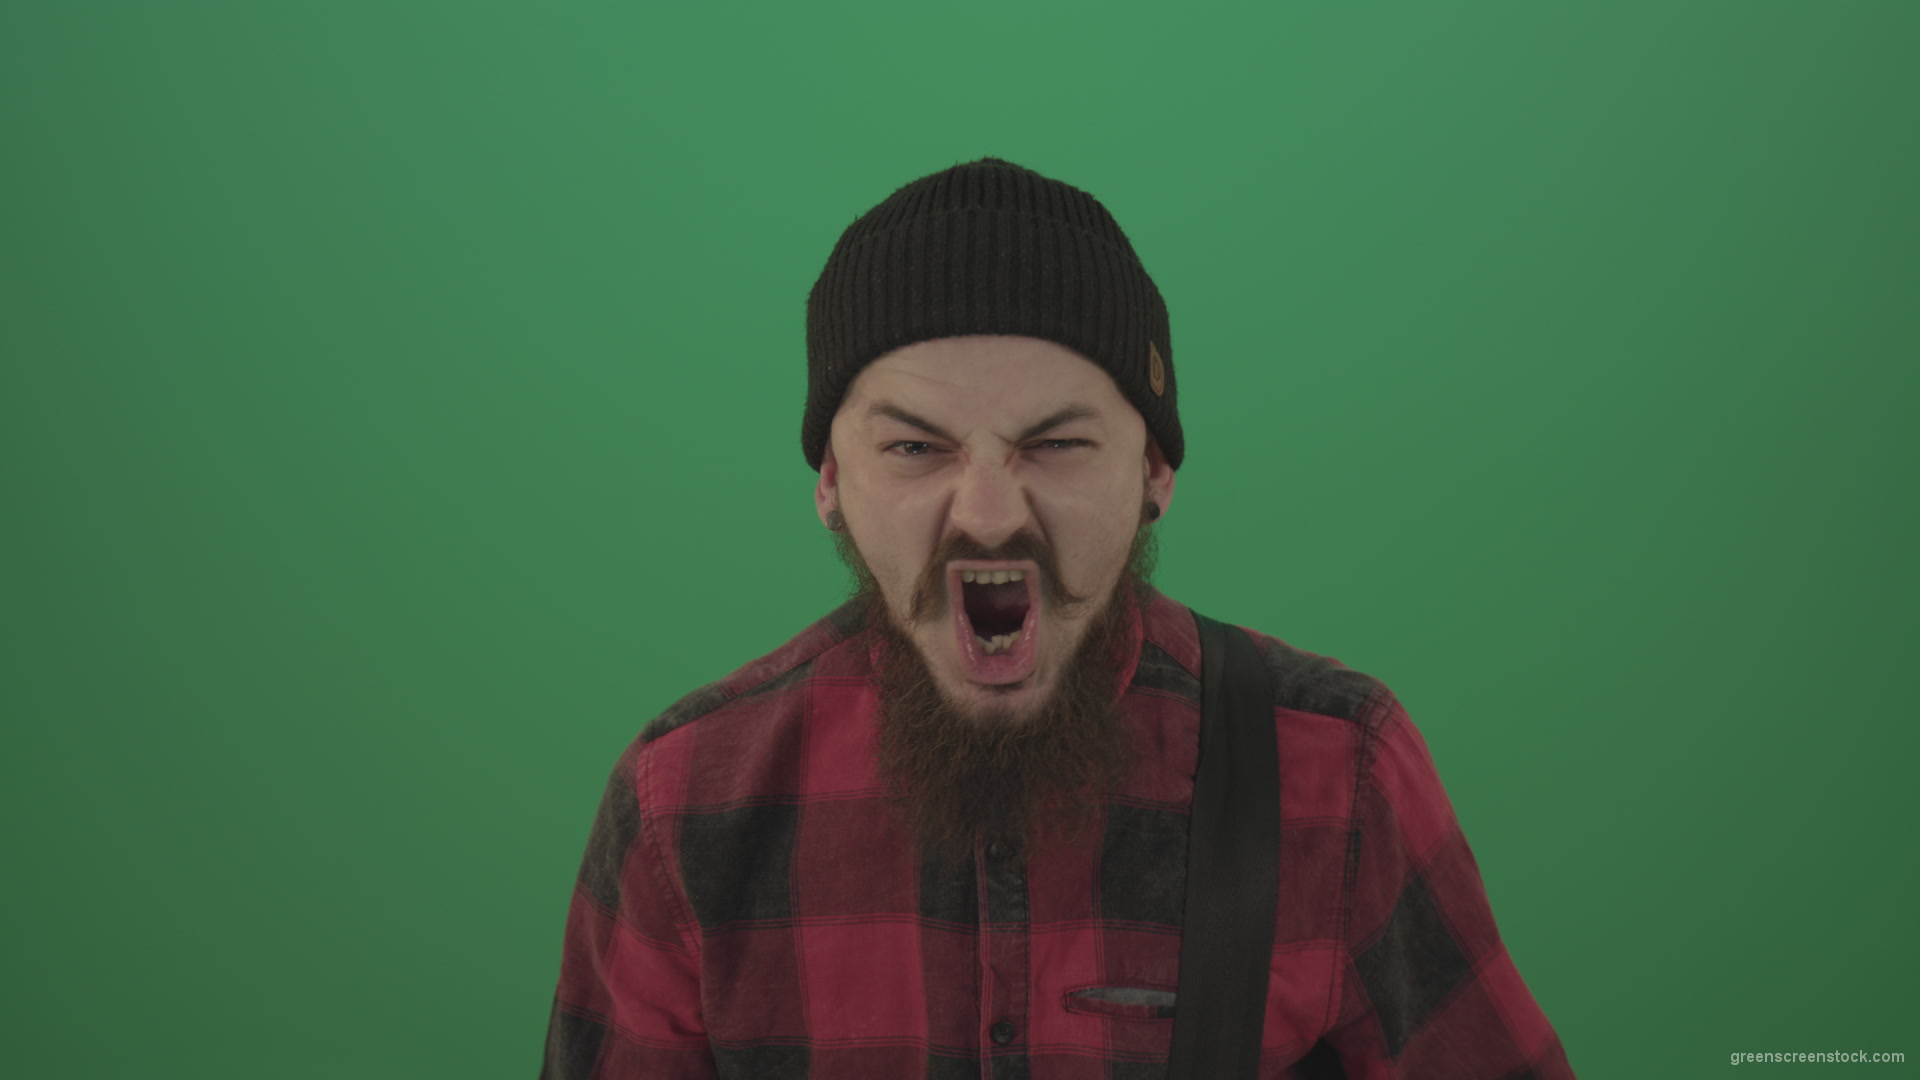 Punk-rocker-man-with-beard-and-red-shirt-screaming-feels-pain-isolated-on-green-screen-background_008 Green Screen Stock